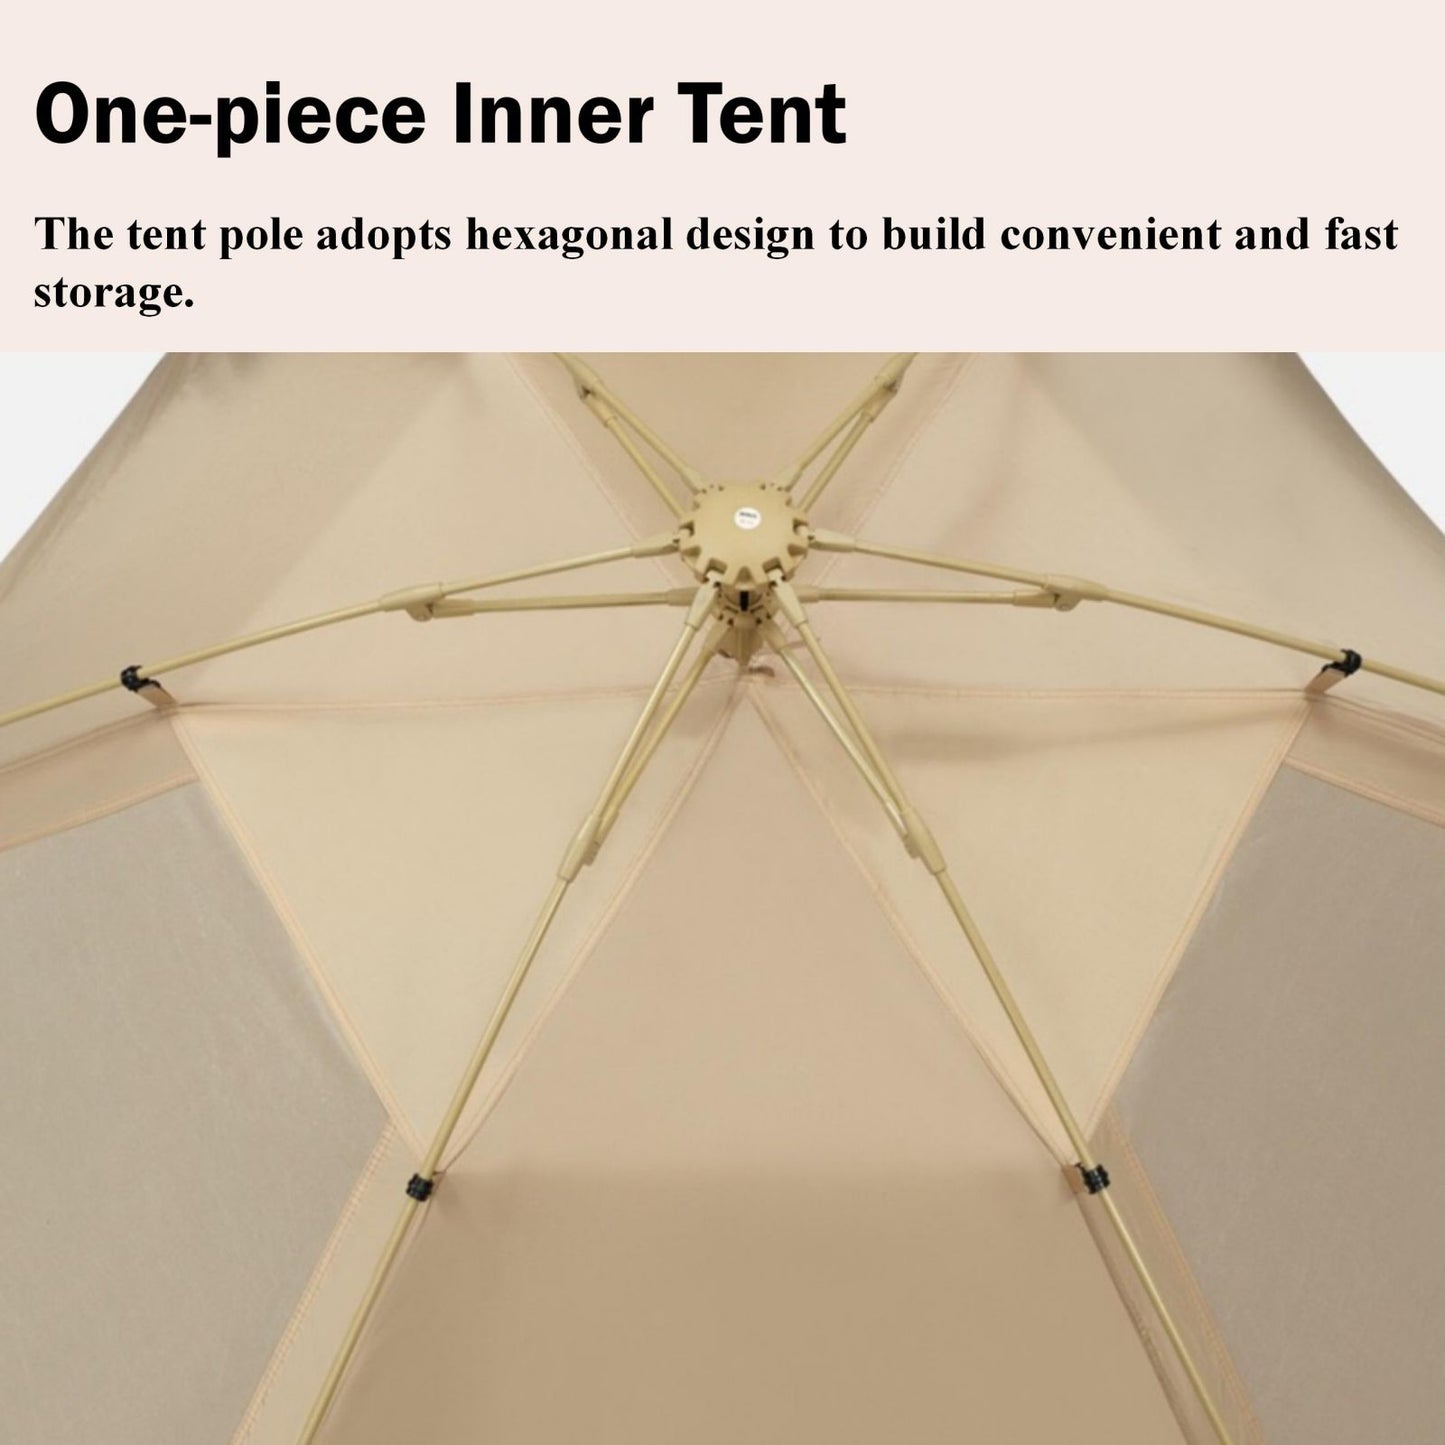 Large Space Luxury Frog Hexagonal Tent 5-8 Person Double Layer - Khaki